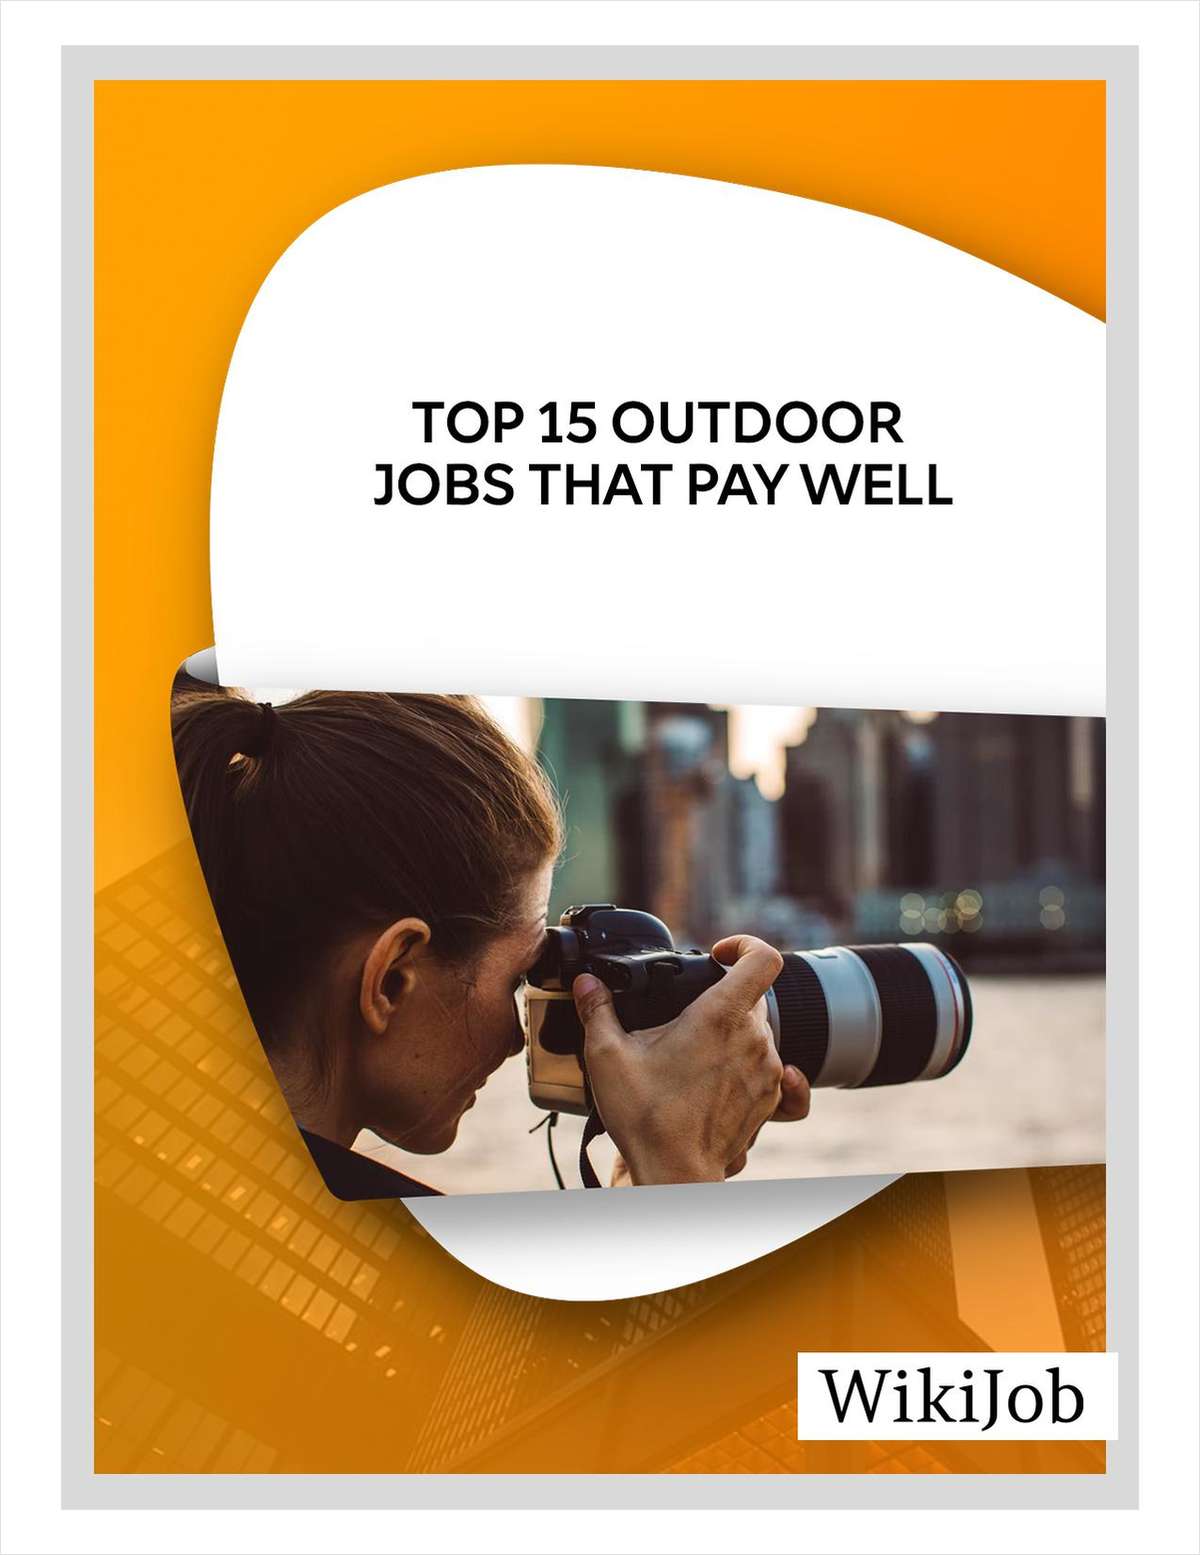 Top 15 Outdoor Jobs That Pay Well